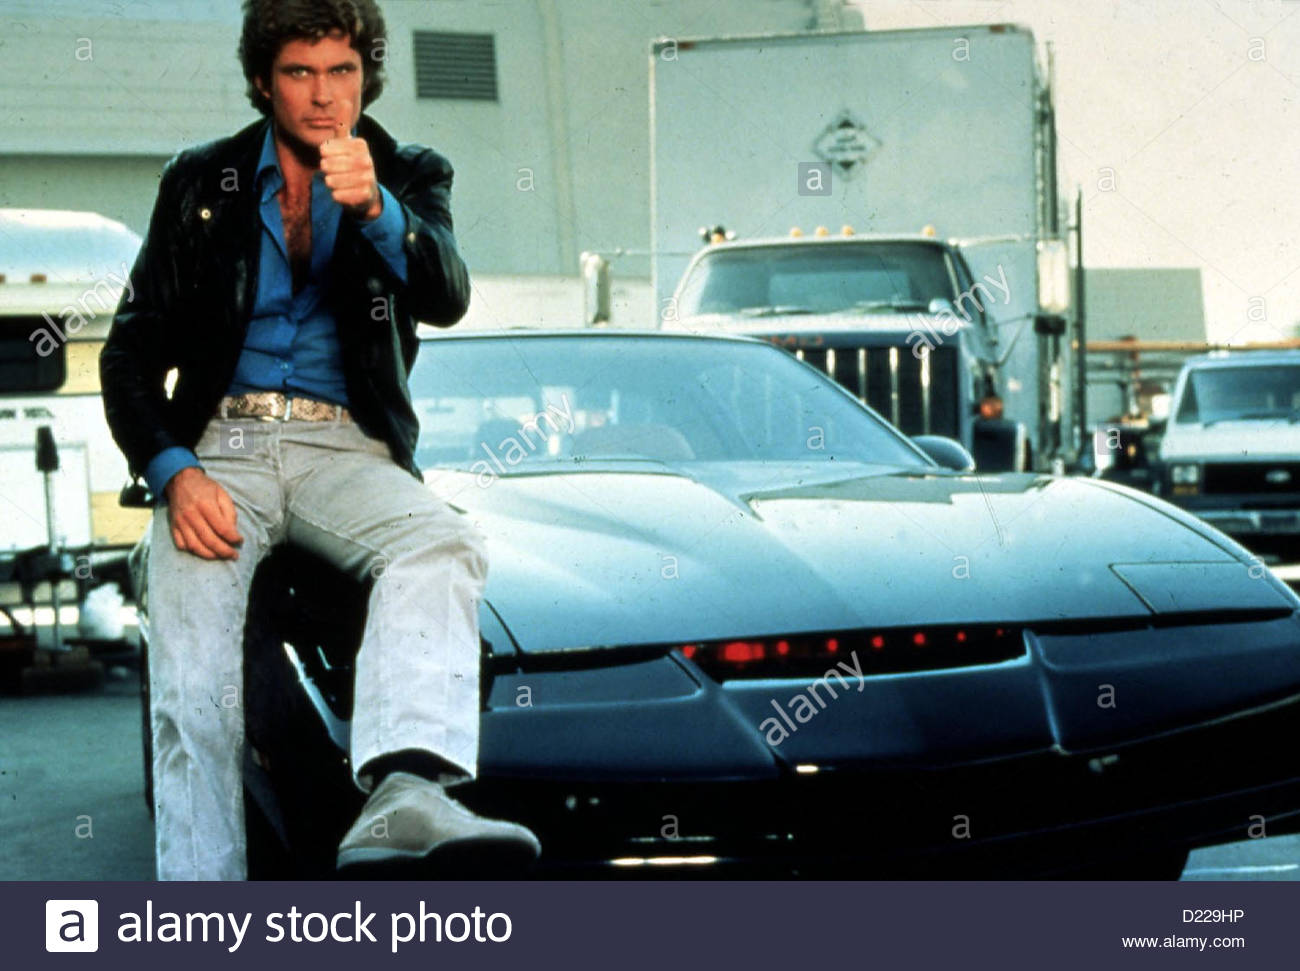 Nice Images Collection: Knight Rider Desktop Wallpapers